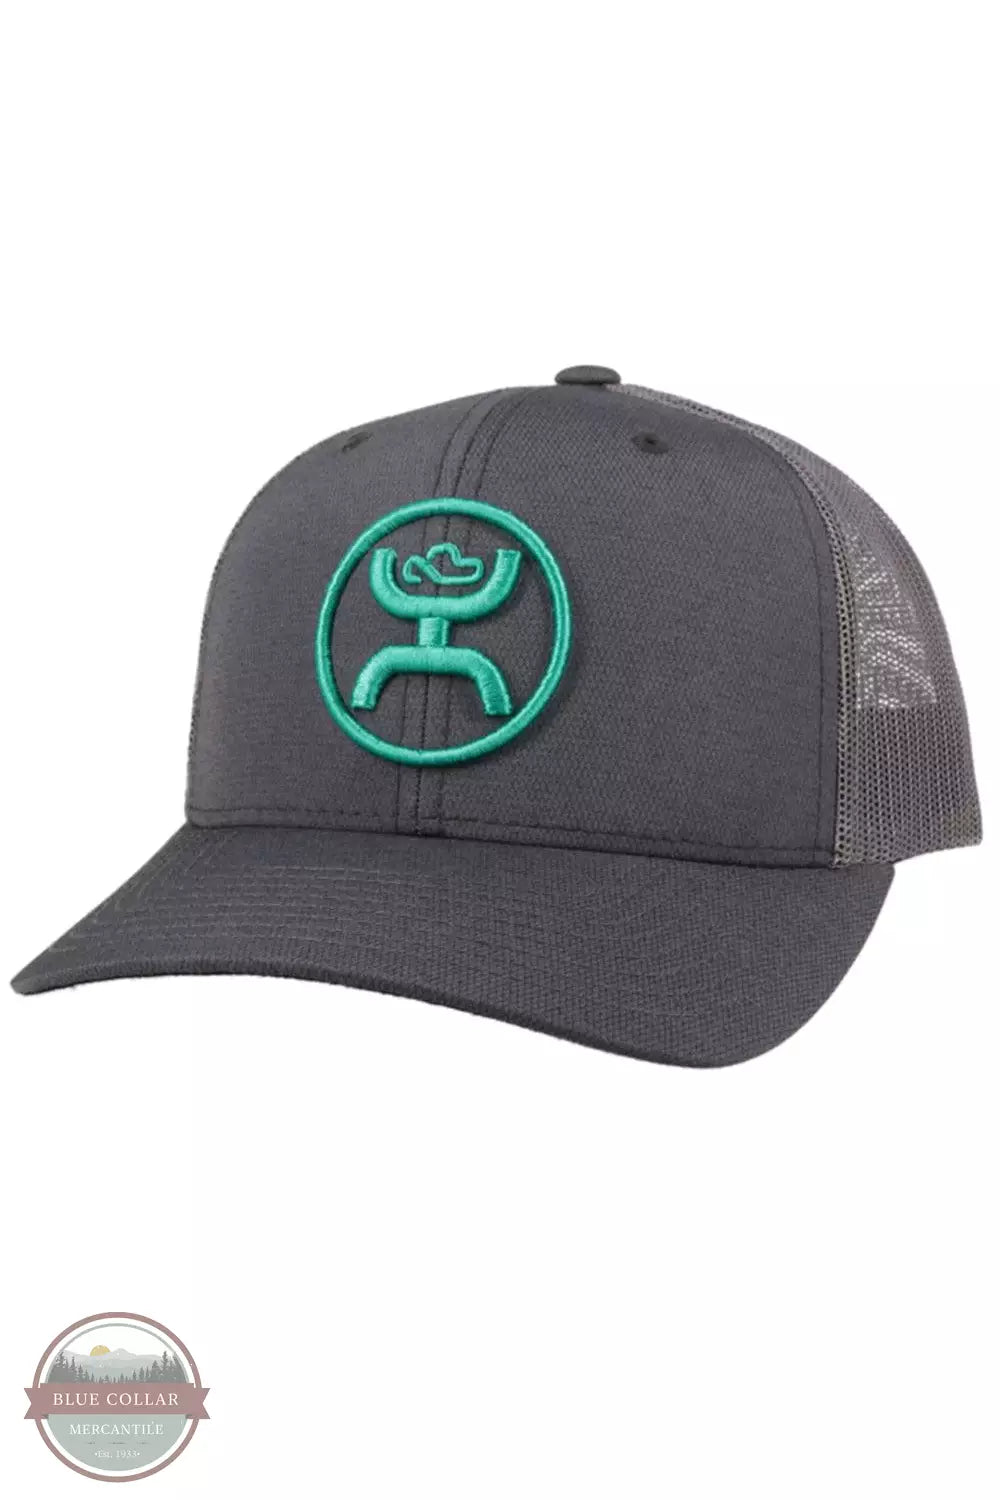 Hooey 2109T-GY O-Classic Grey Cap Profile View